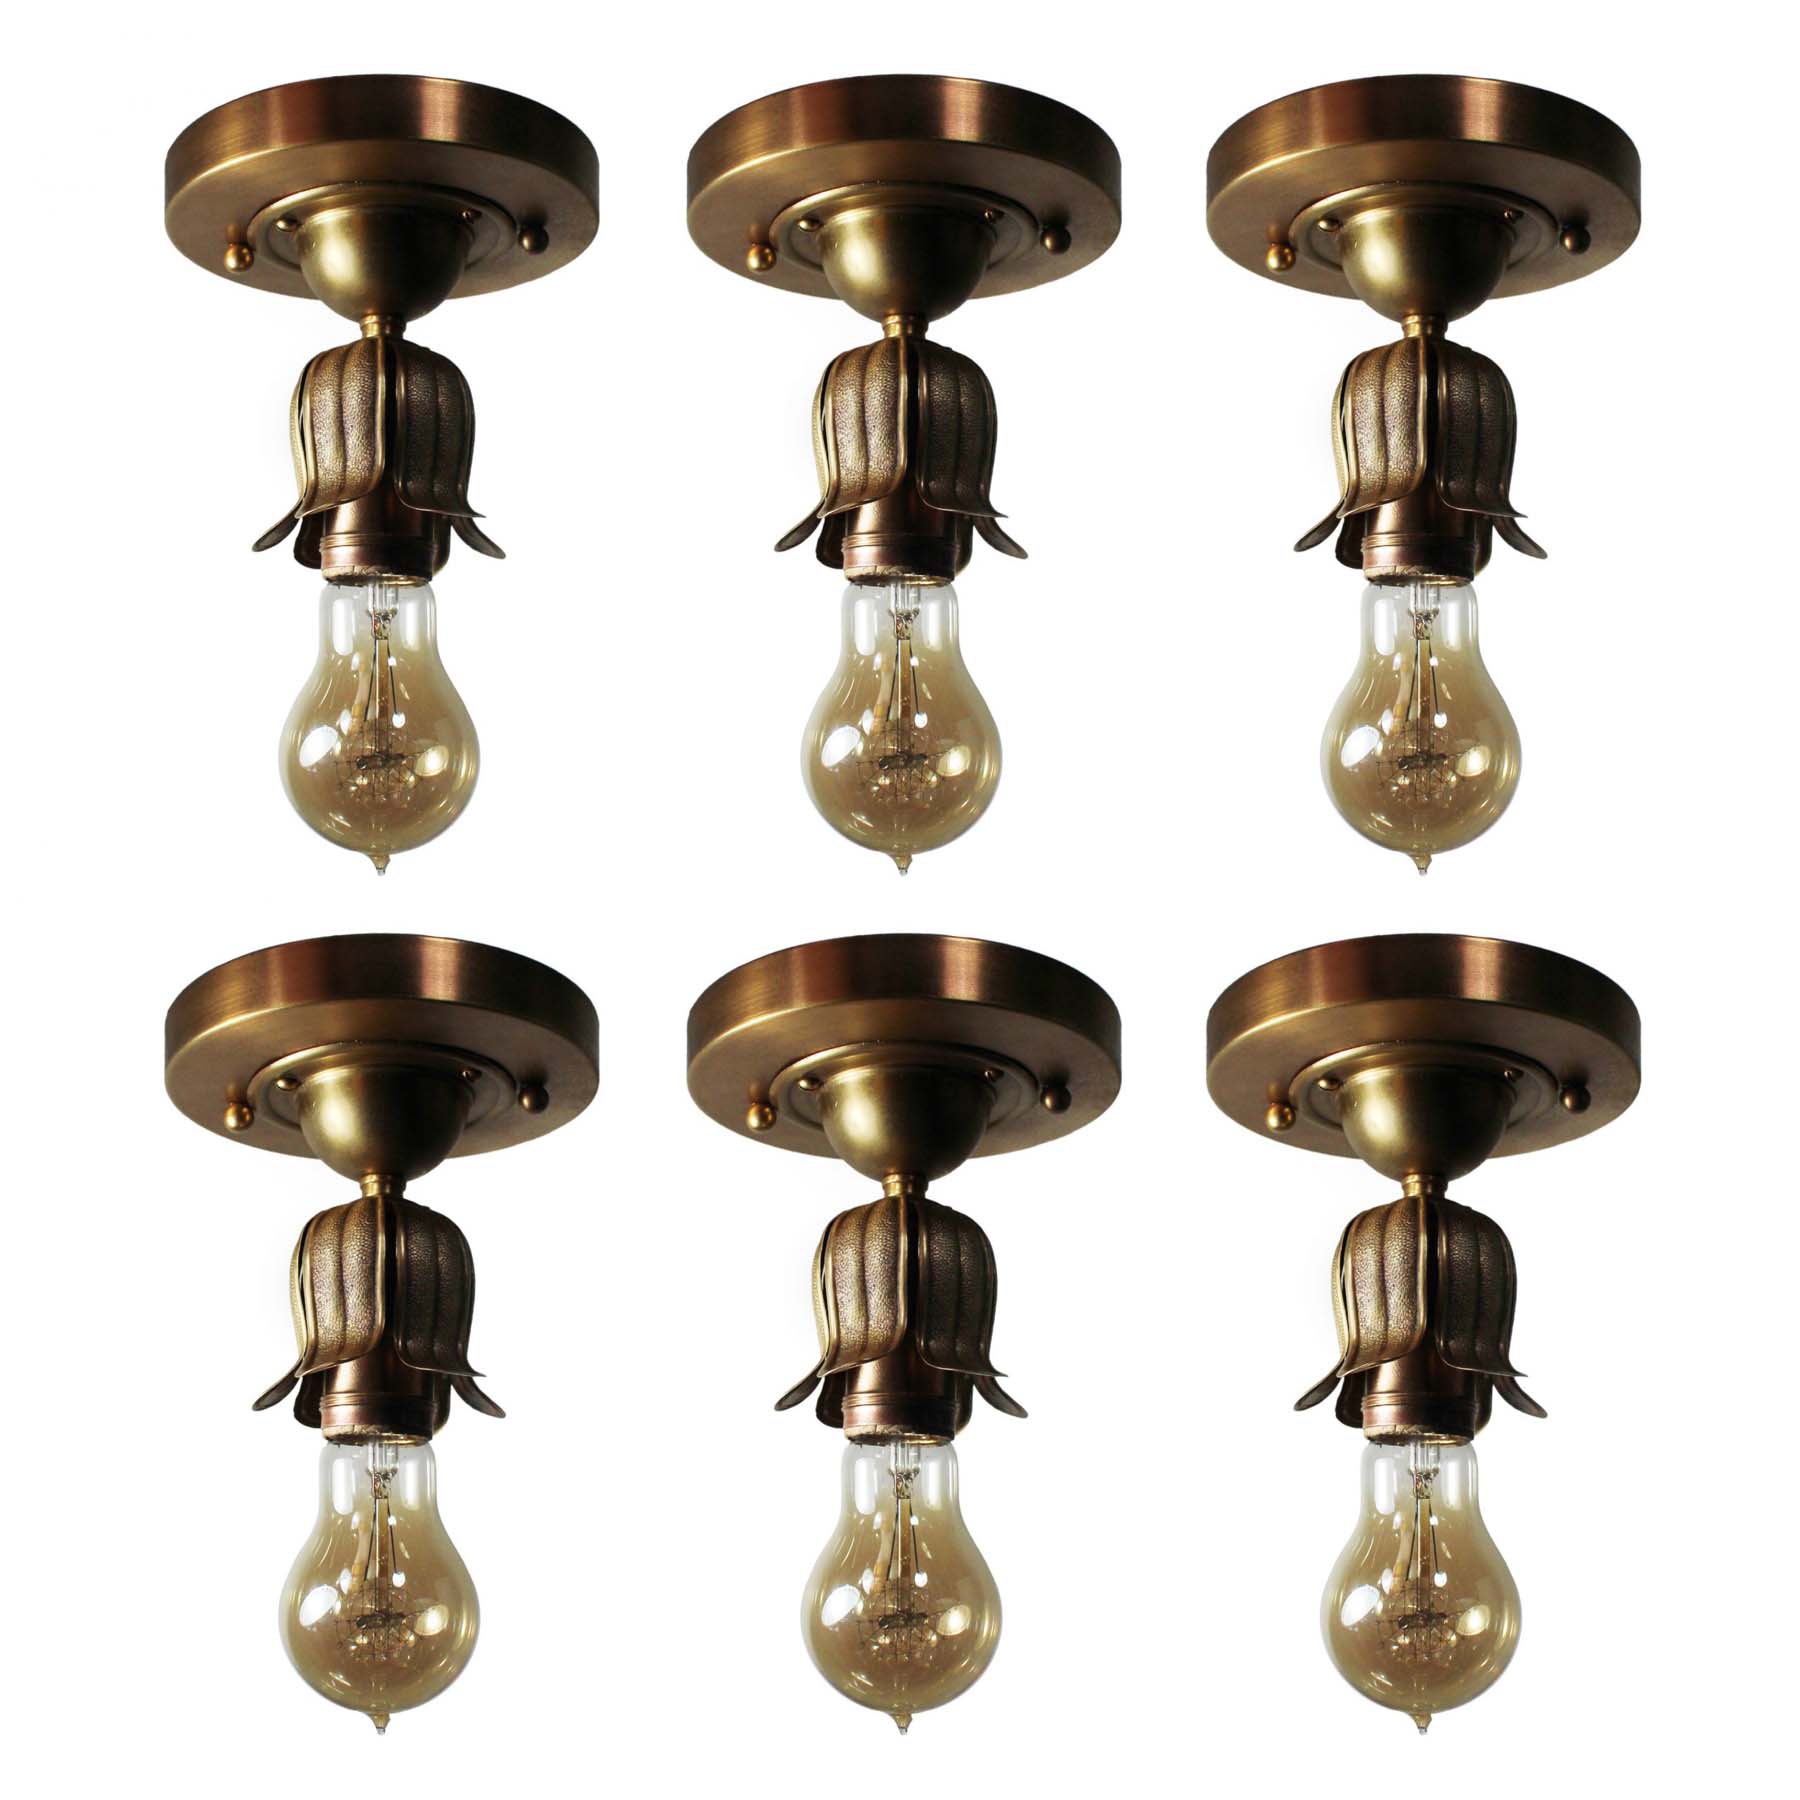 SOLD Brass Flush-Mount Lights with Exposed Bulbs, Antique Lighting-0